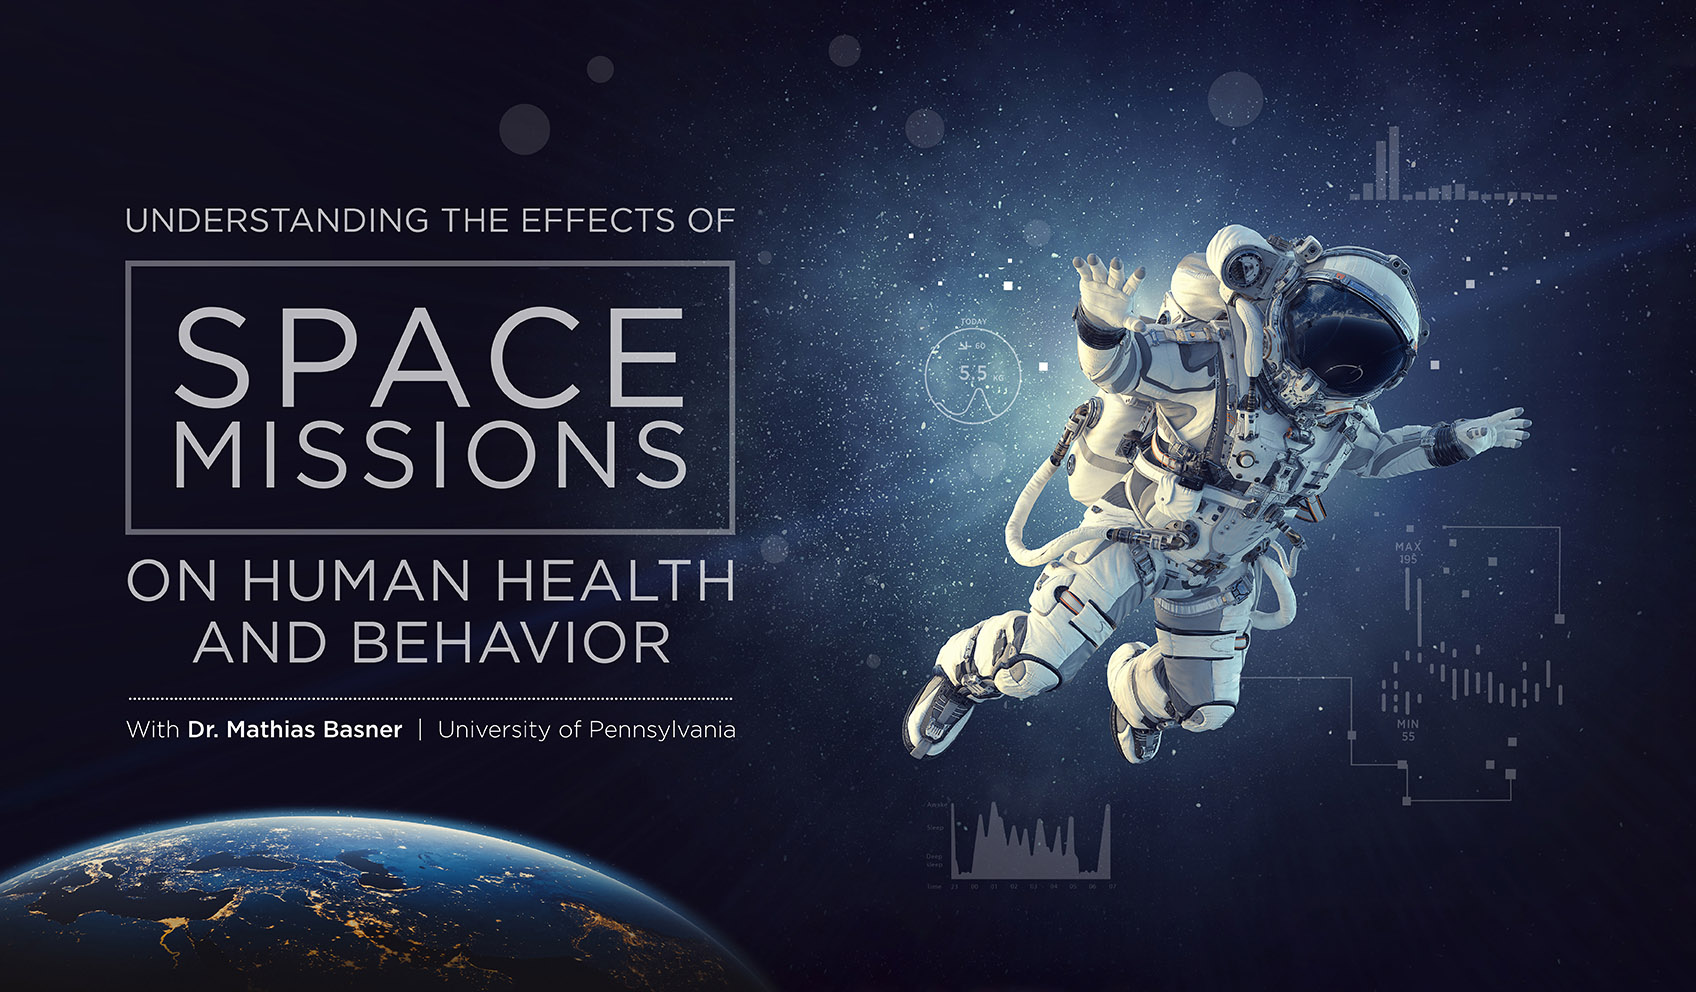 Understanding the Effects of Space Missions on Human Health and Behavior